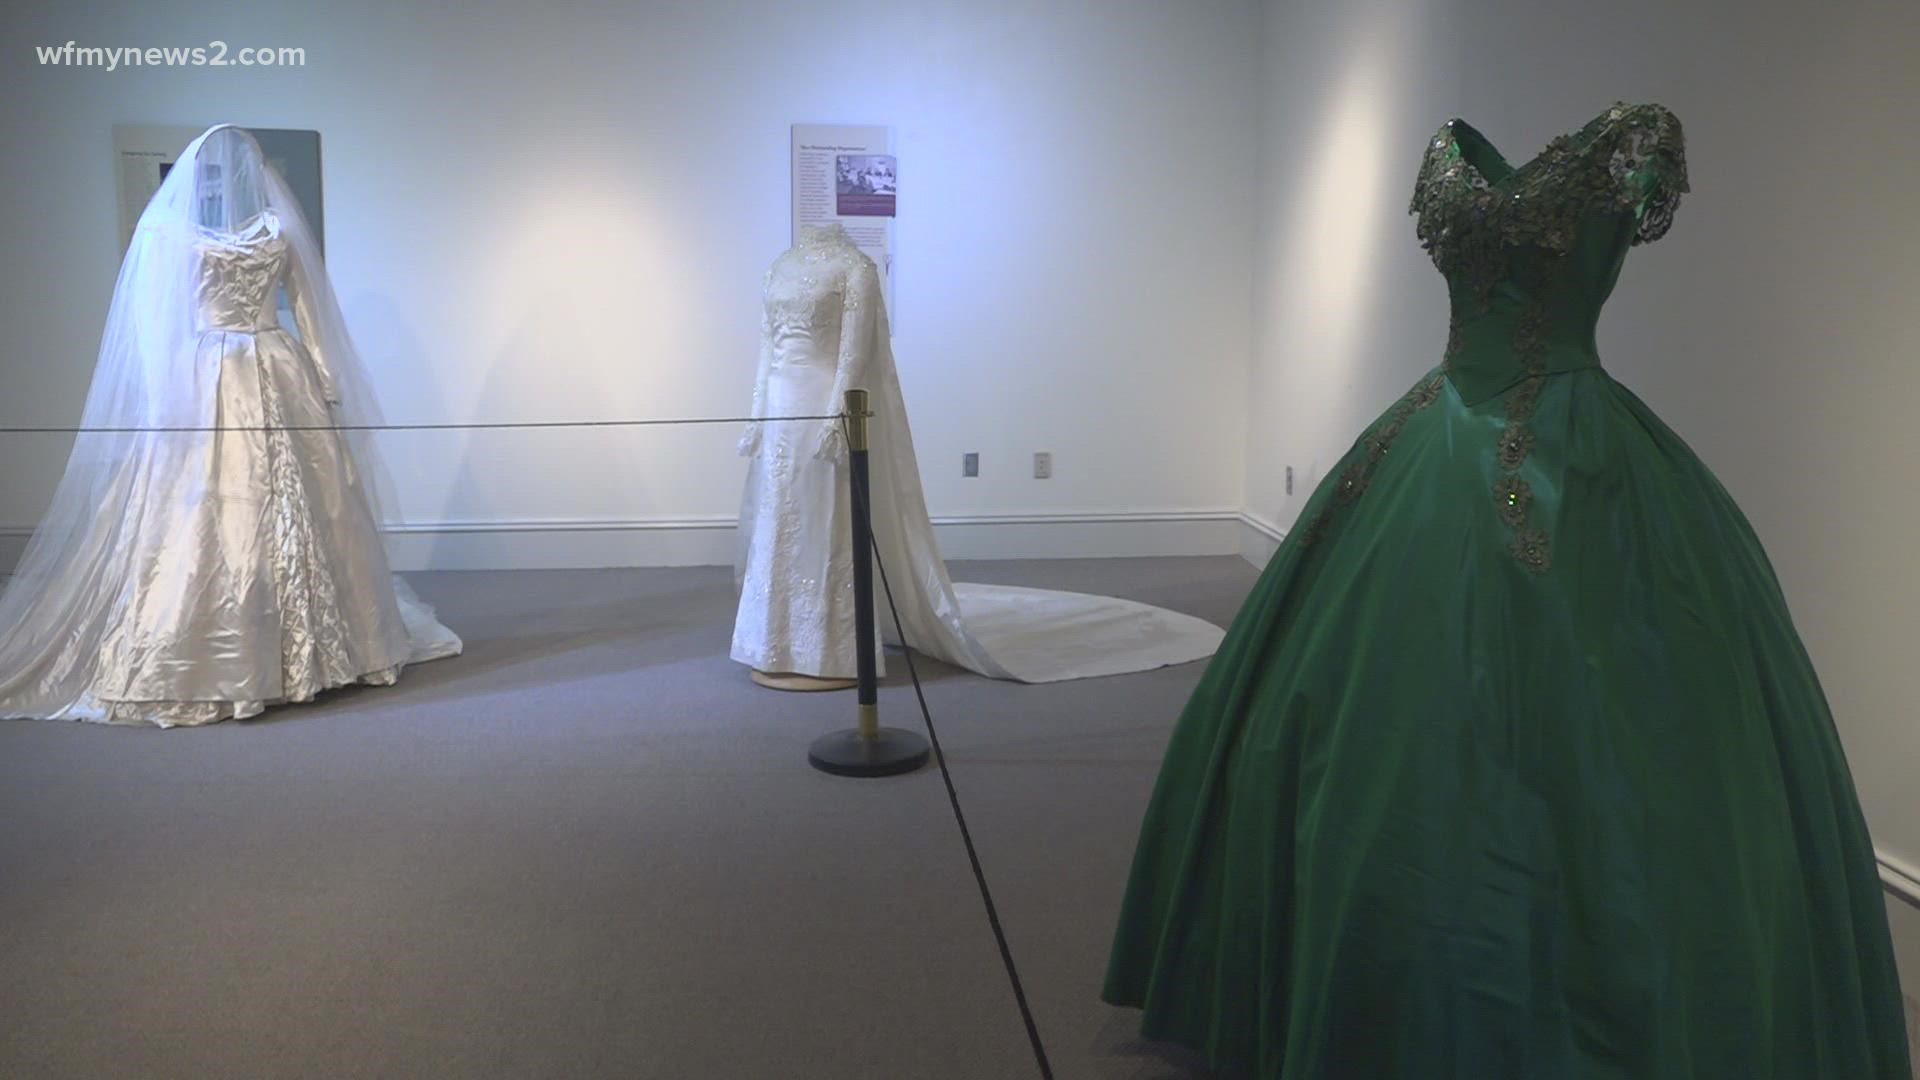 “Made Especially for You” is a traveling dress exhibit by artist Willie Kay. The exhibit is currently on display at NC A&T.